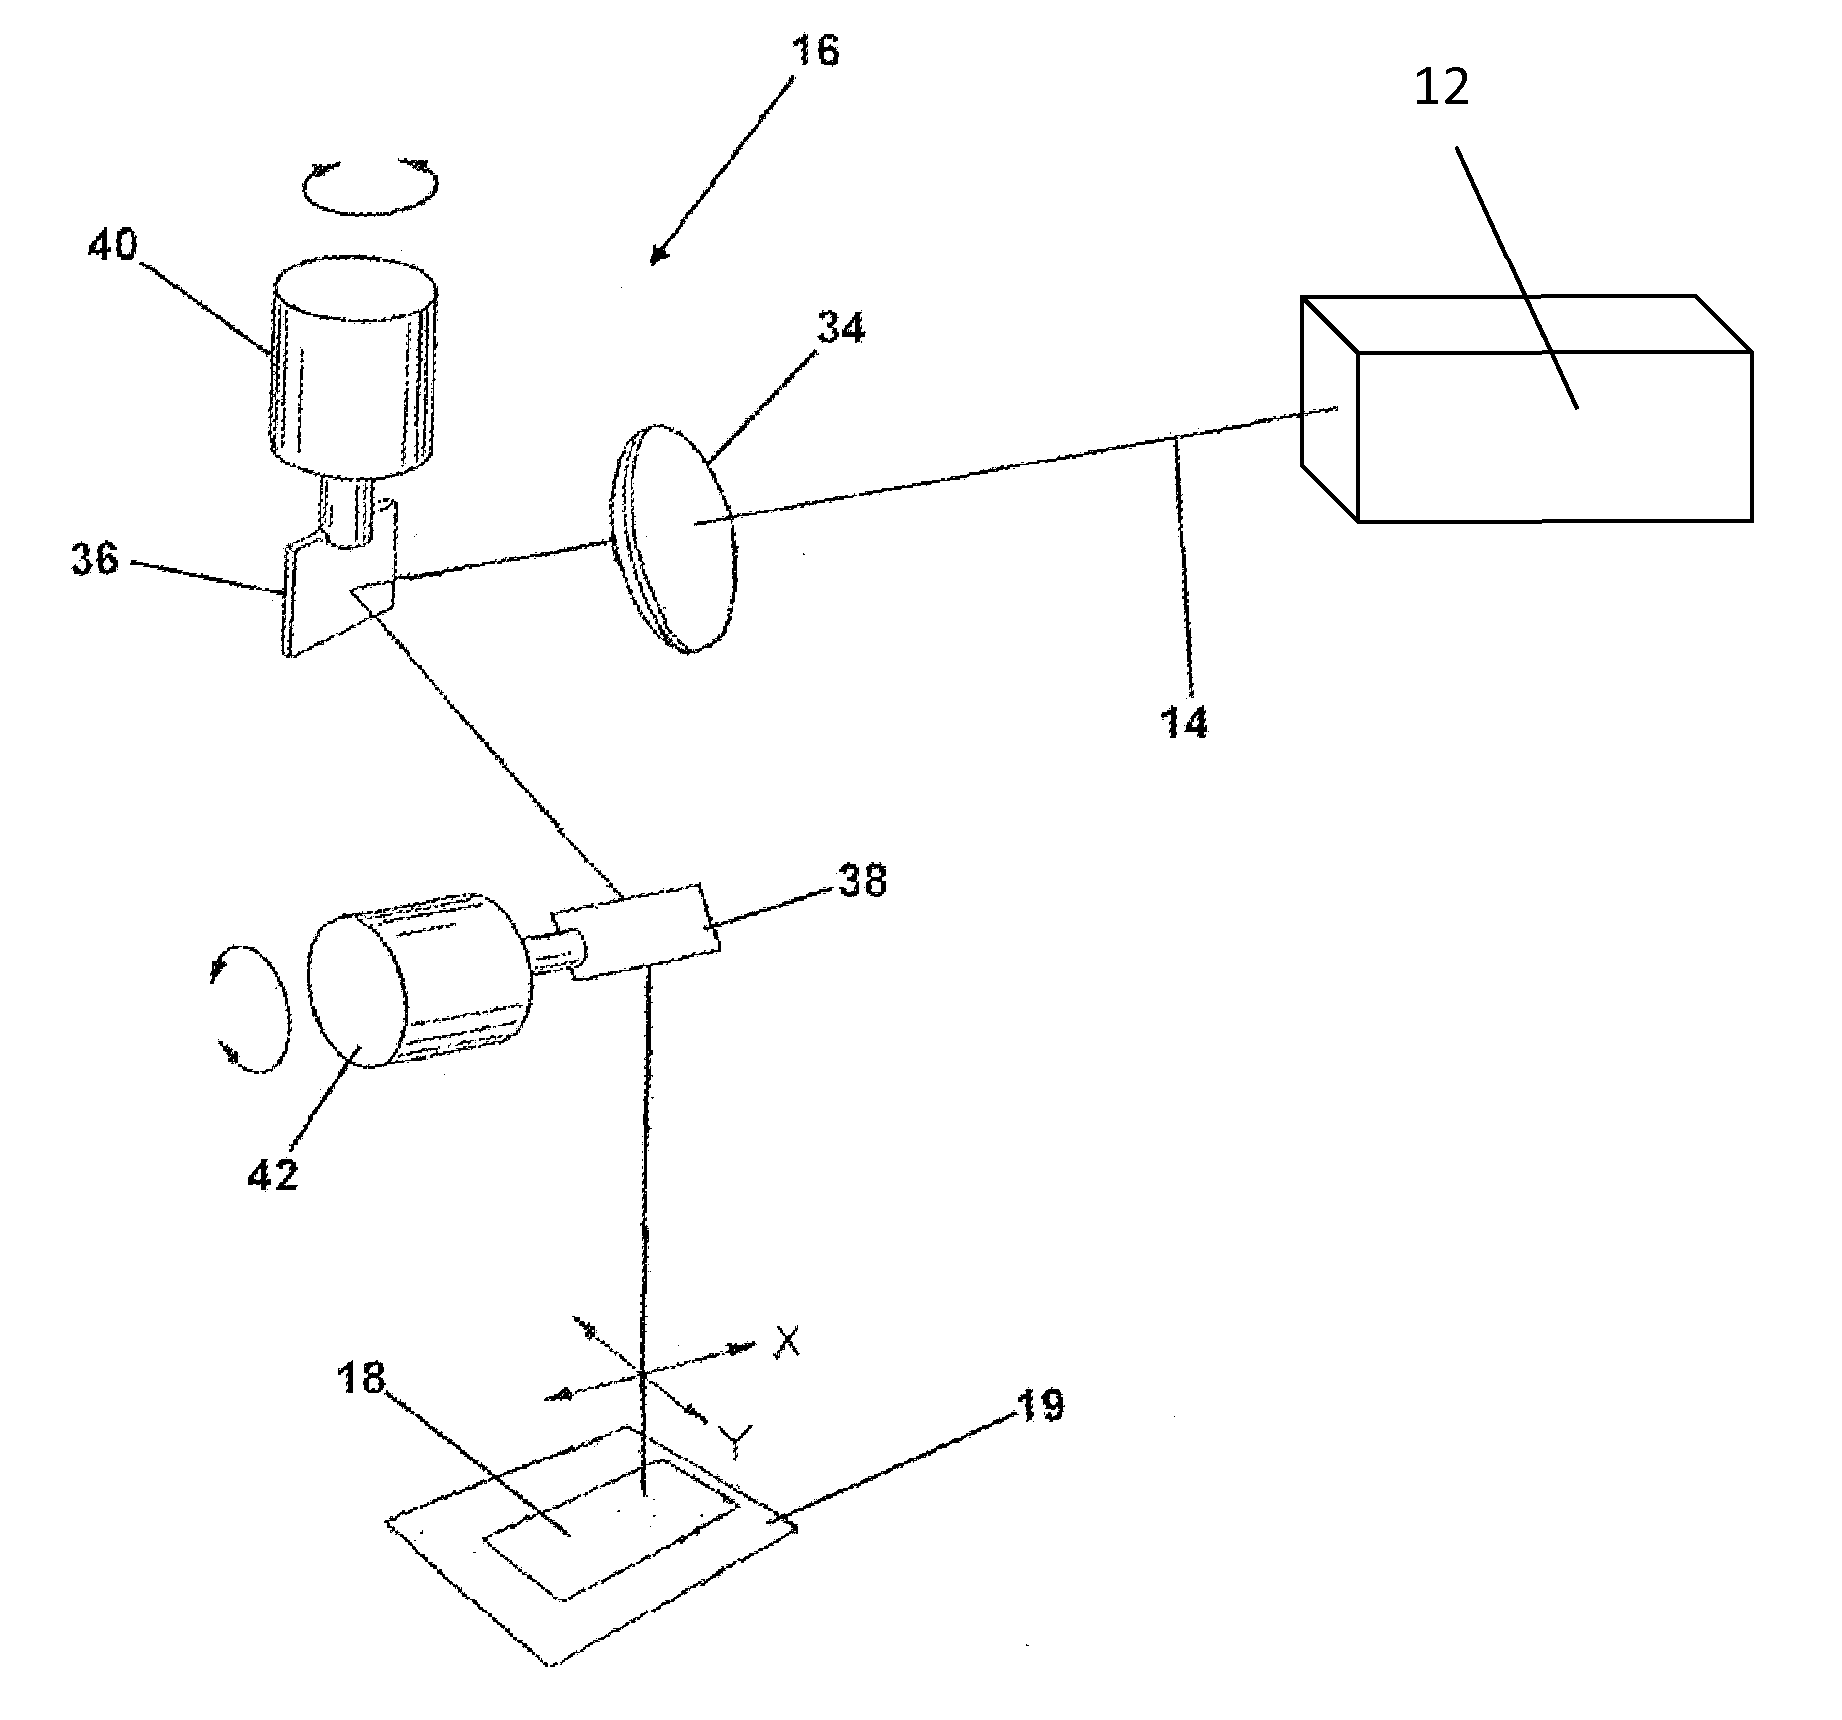 Systems and methods for patterning using a laser